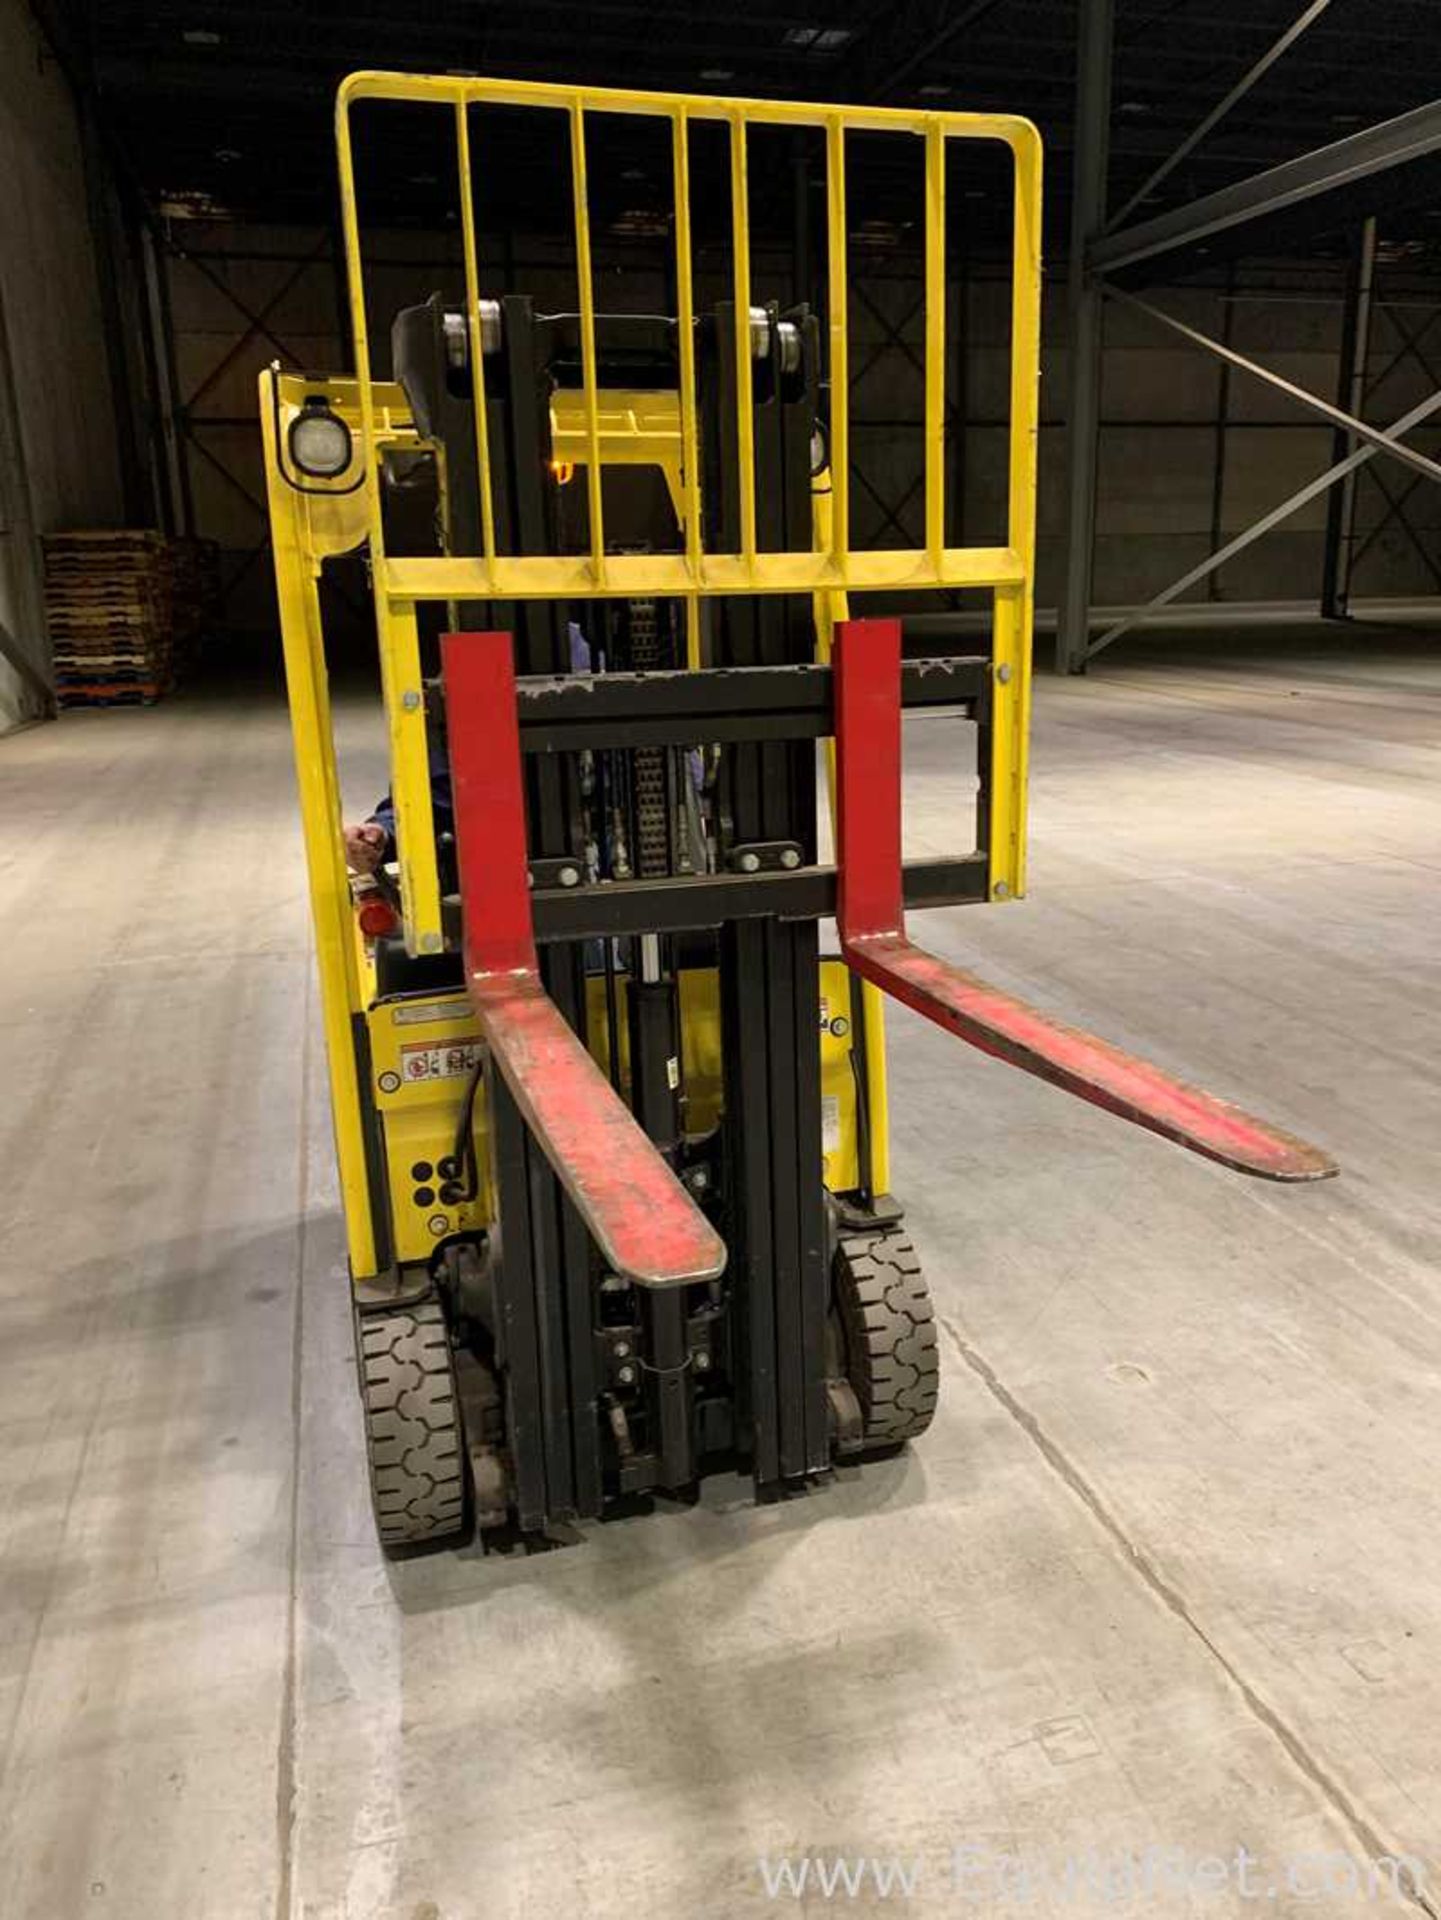 Hyster R30CH 2500 LB. Electric Pallet Jack Currently Non Operational - Image 2 of 4